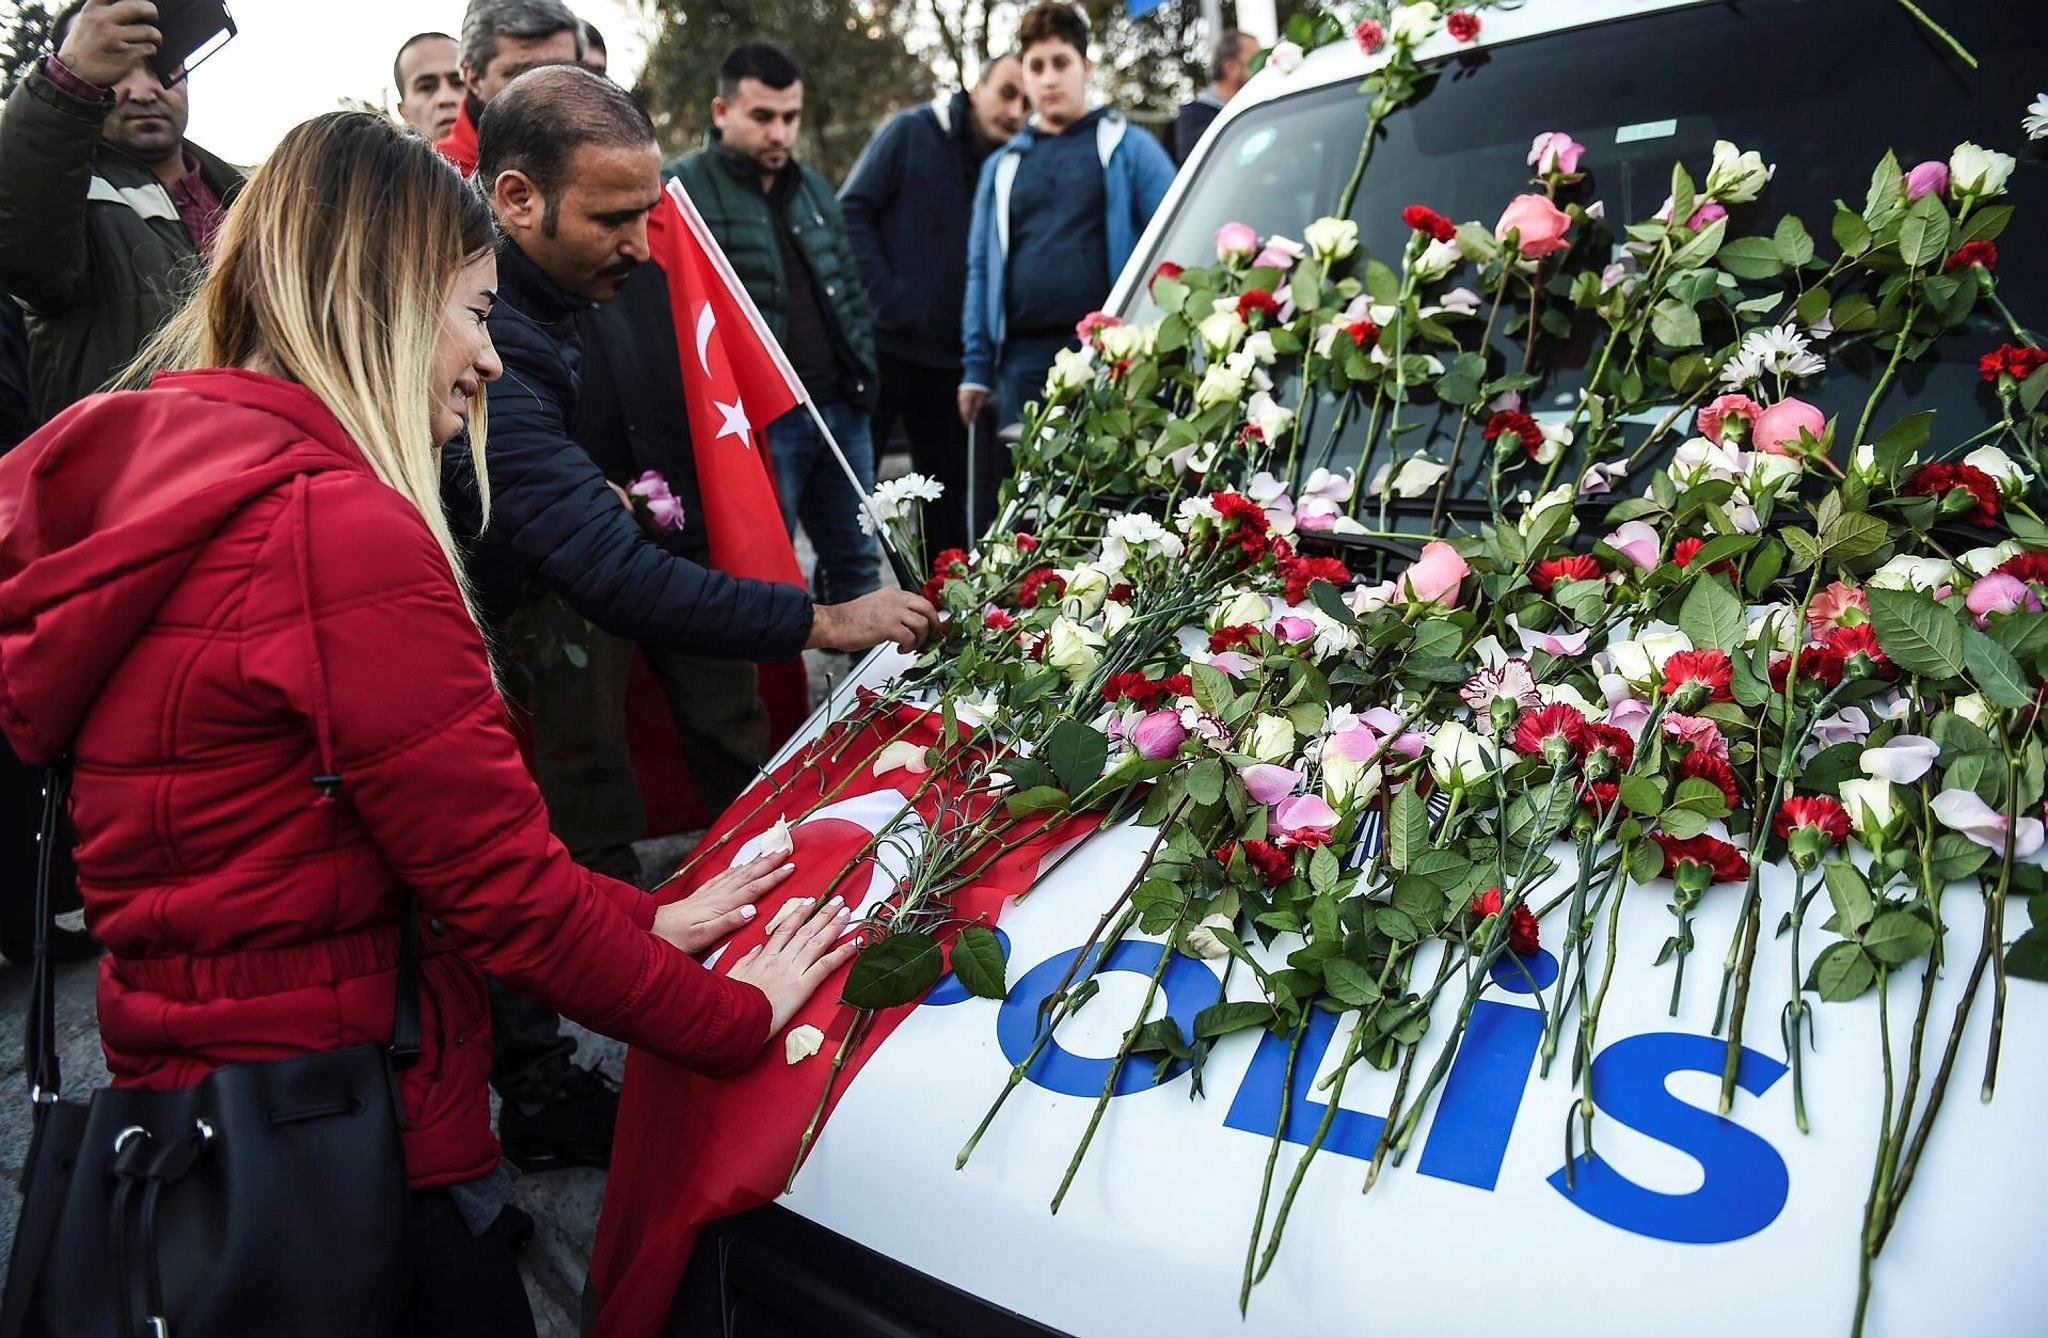 A woman cries next to a police car at the scene of the attack covered with flowers left by mourners. The public marched on Sunday against terror and to remember the victims.